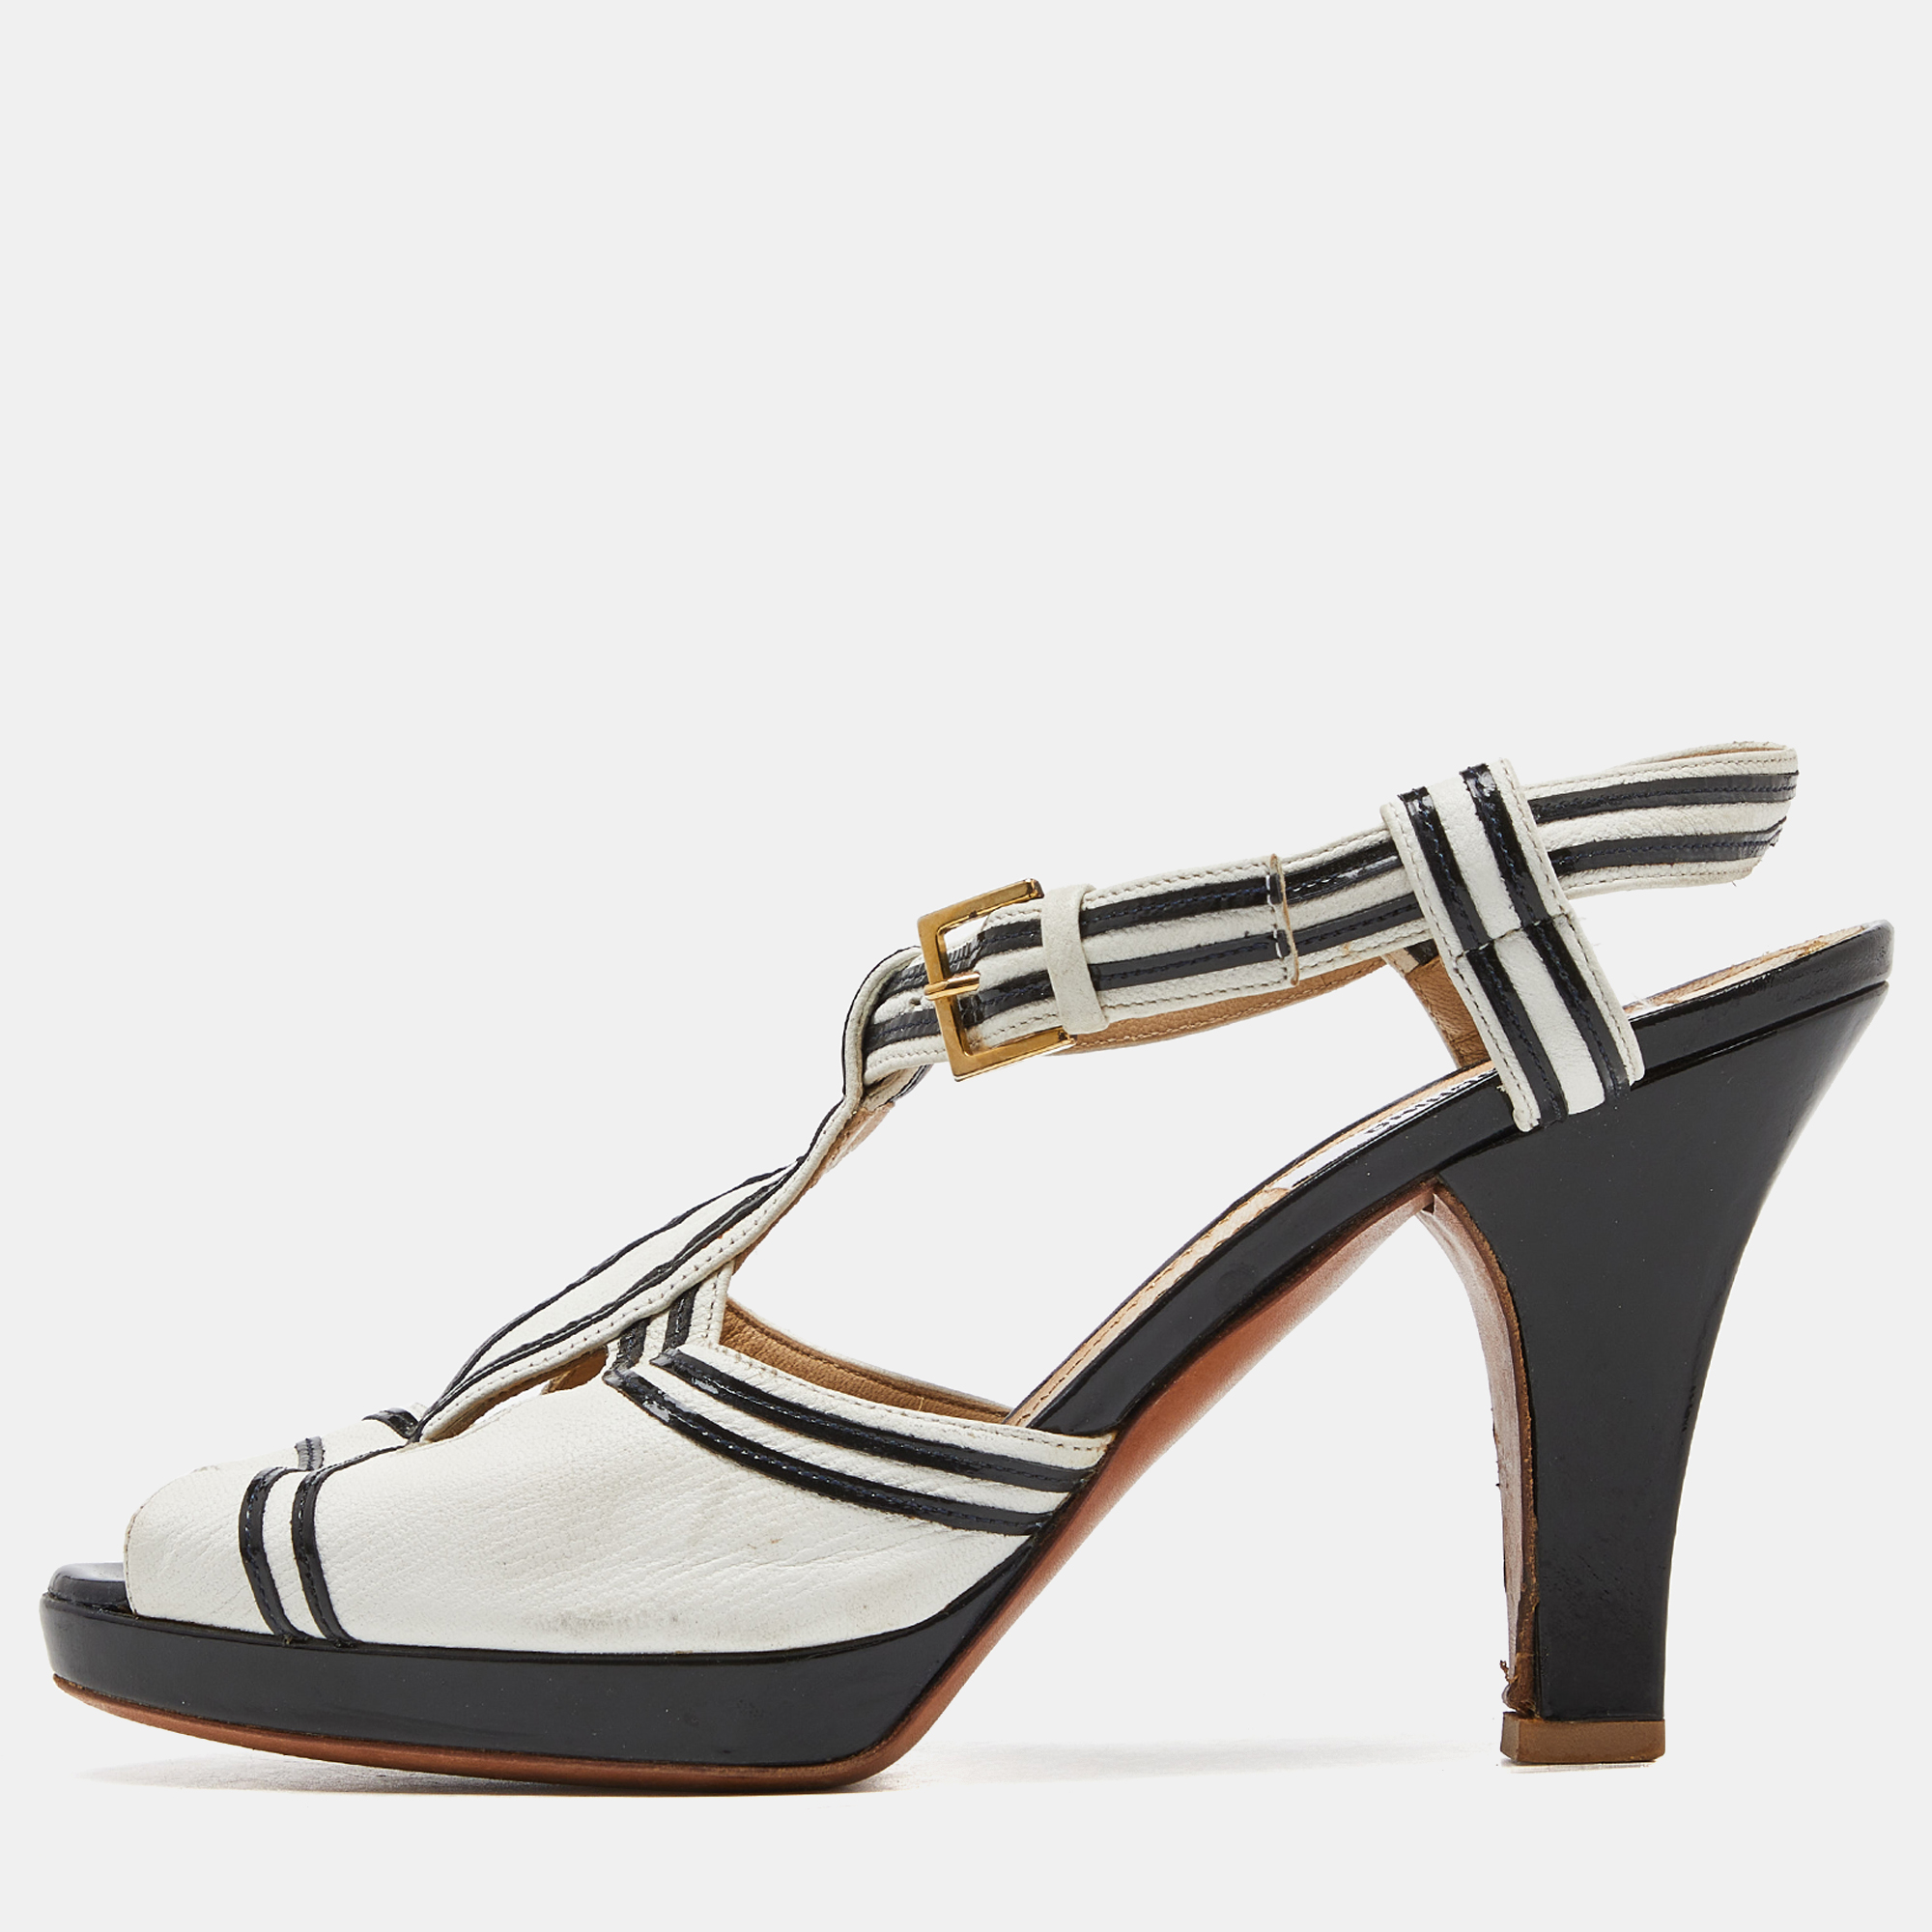 Moschino white/black leather slingback sandals size 37